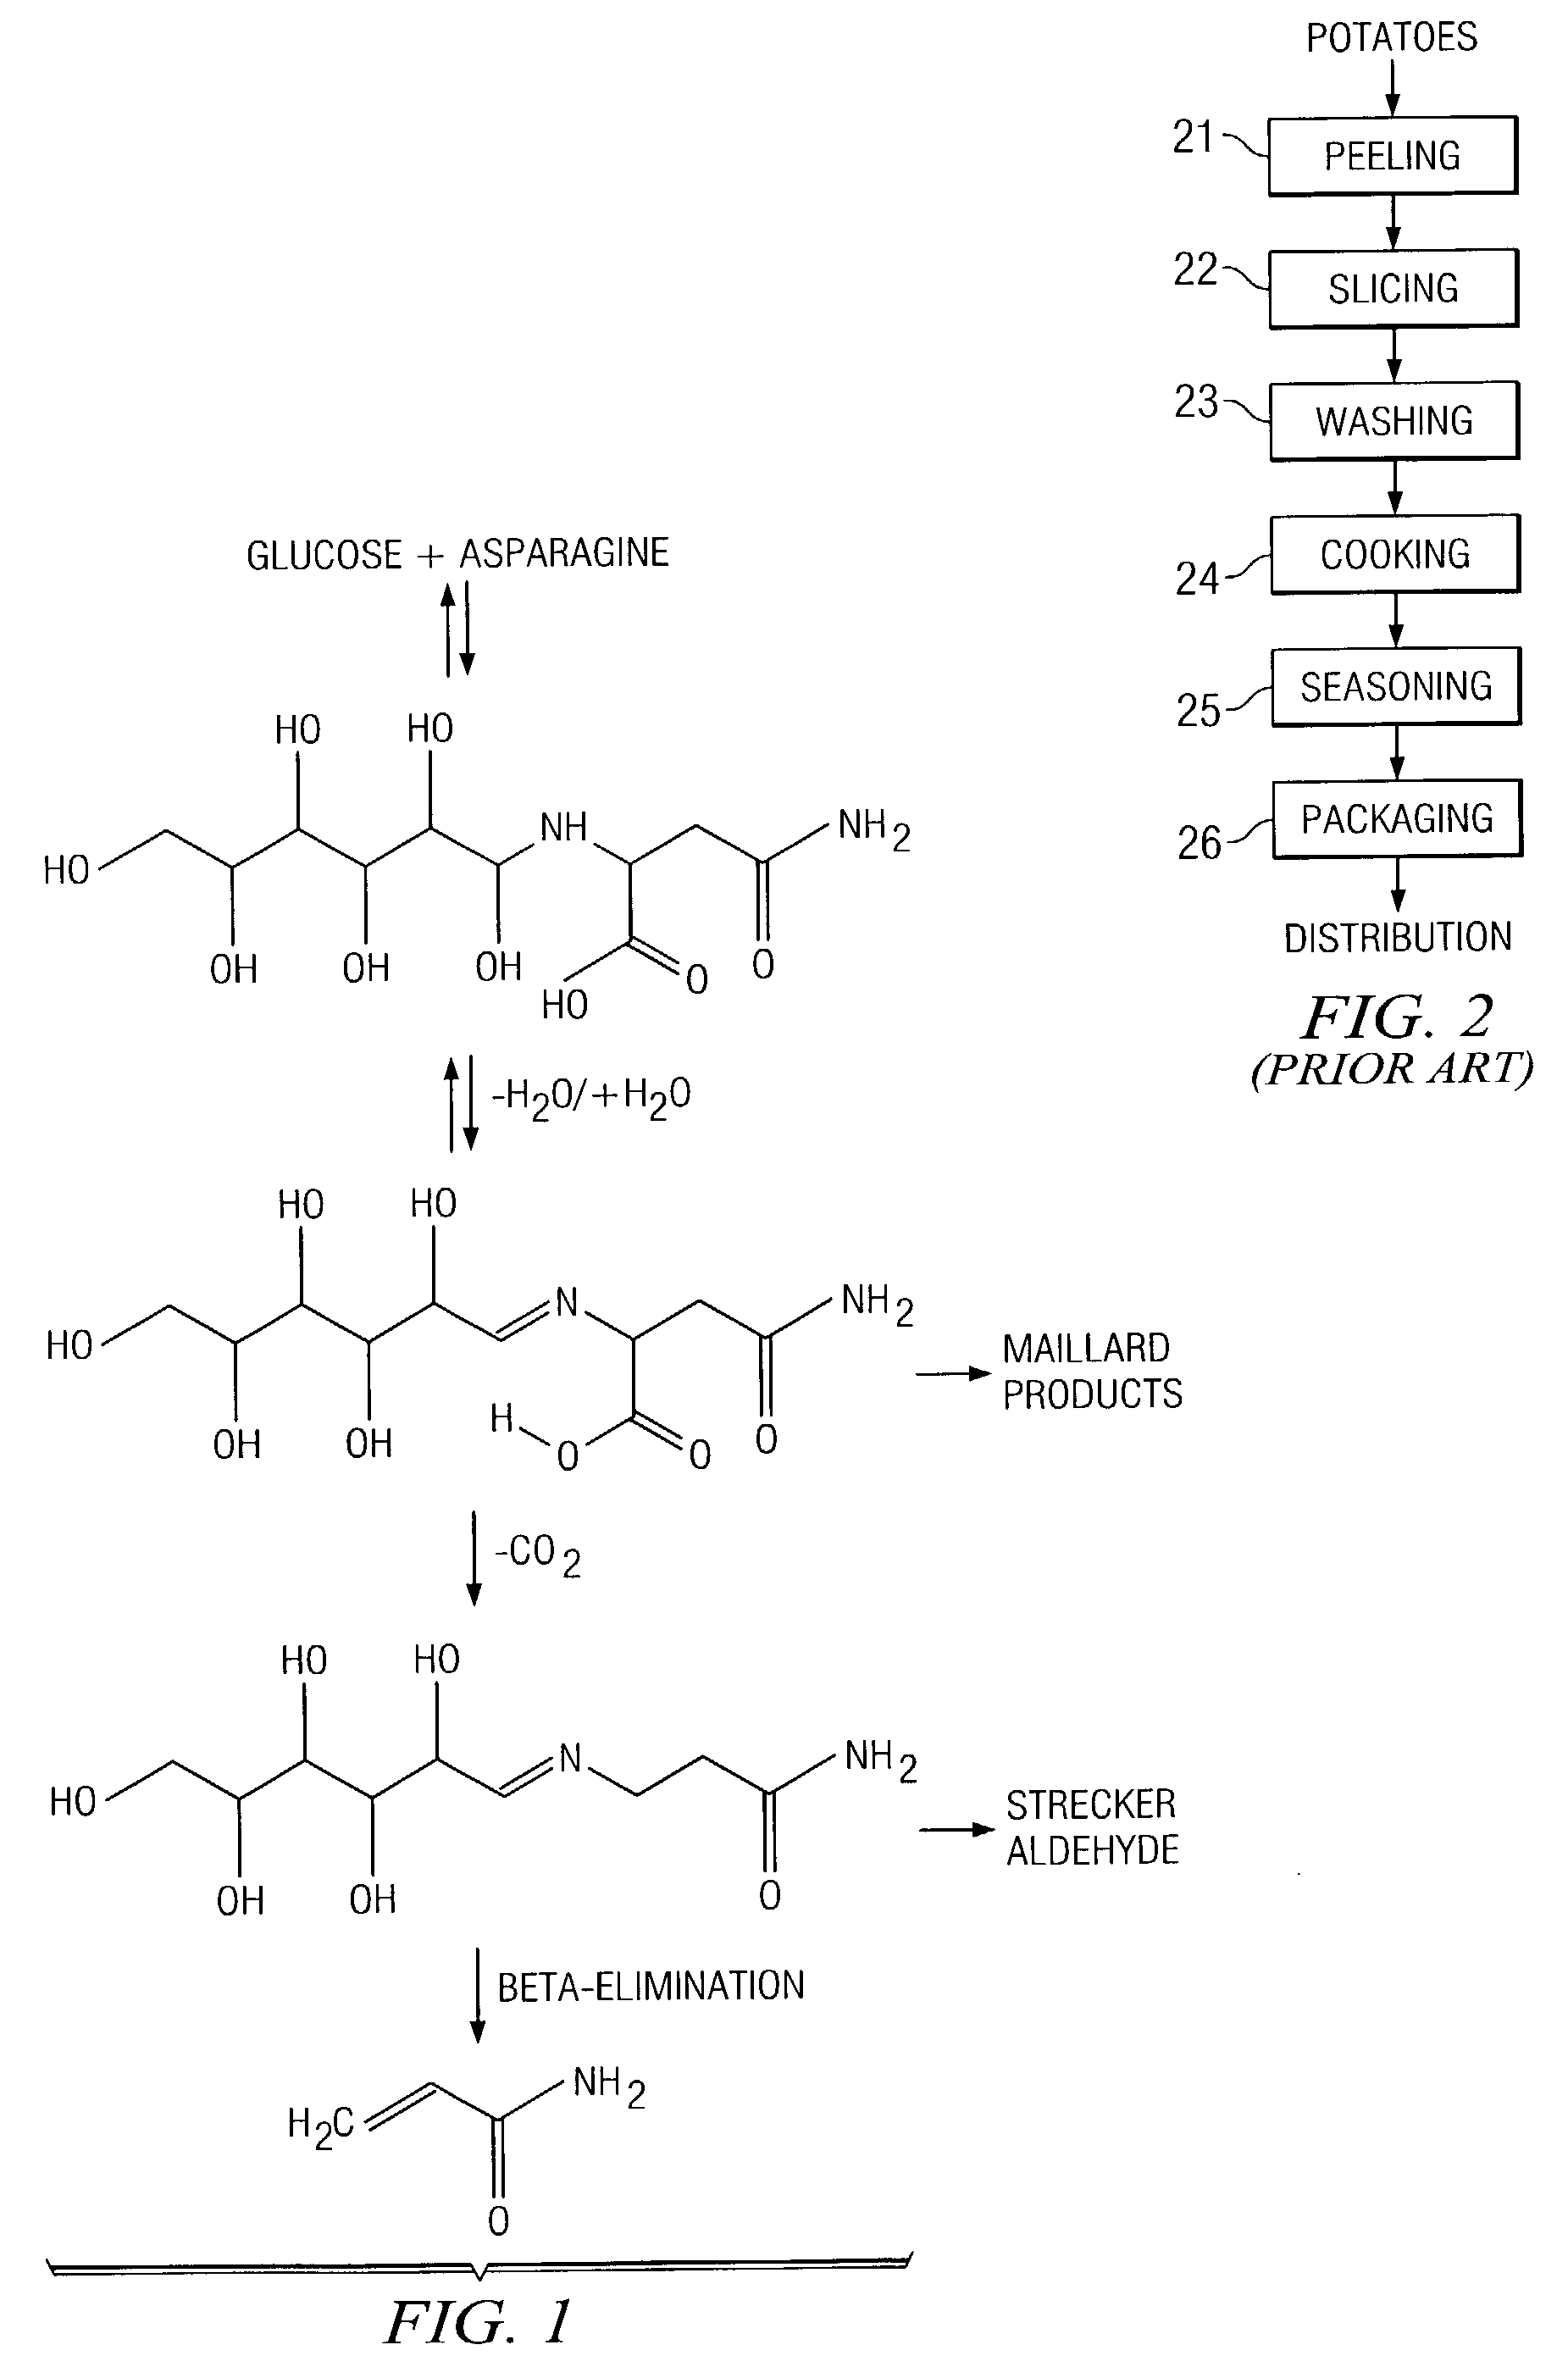 Method for reducing acrylamide formation in thermally processed foods